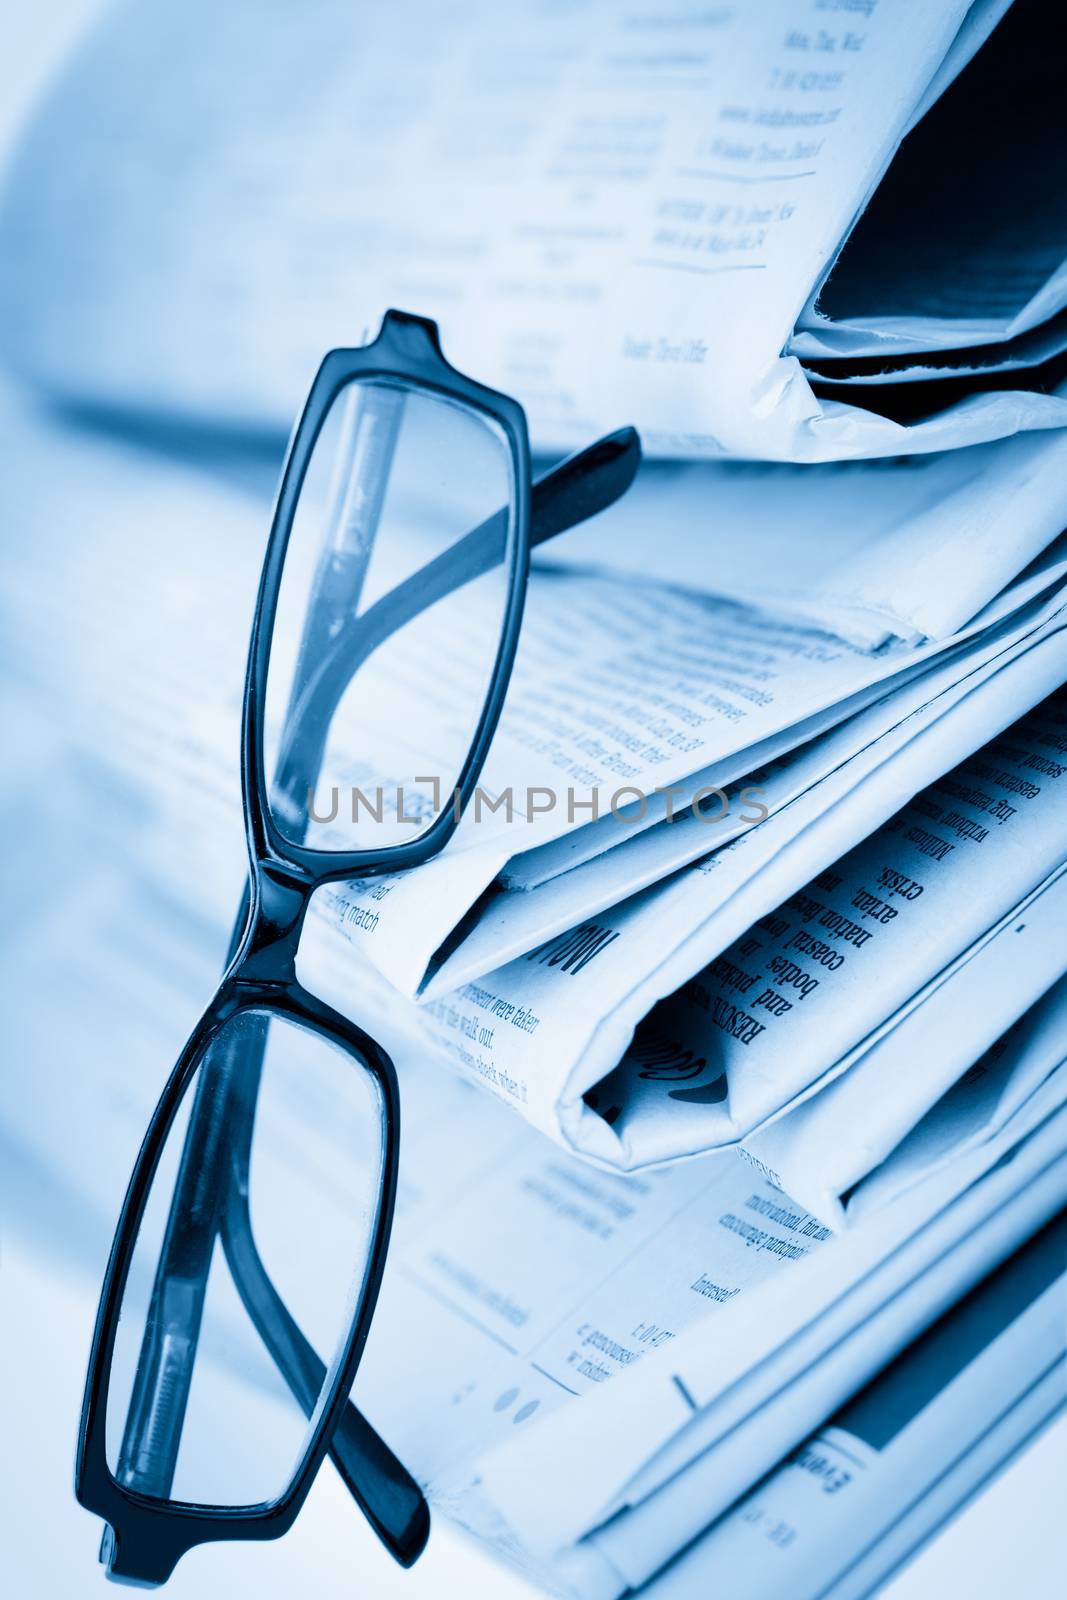 Newspapers and black glasses against a white a background